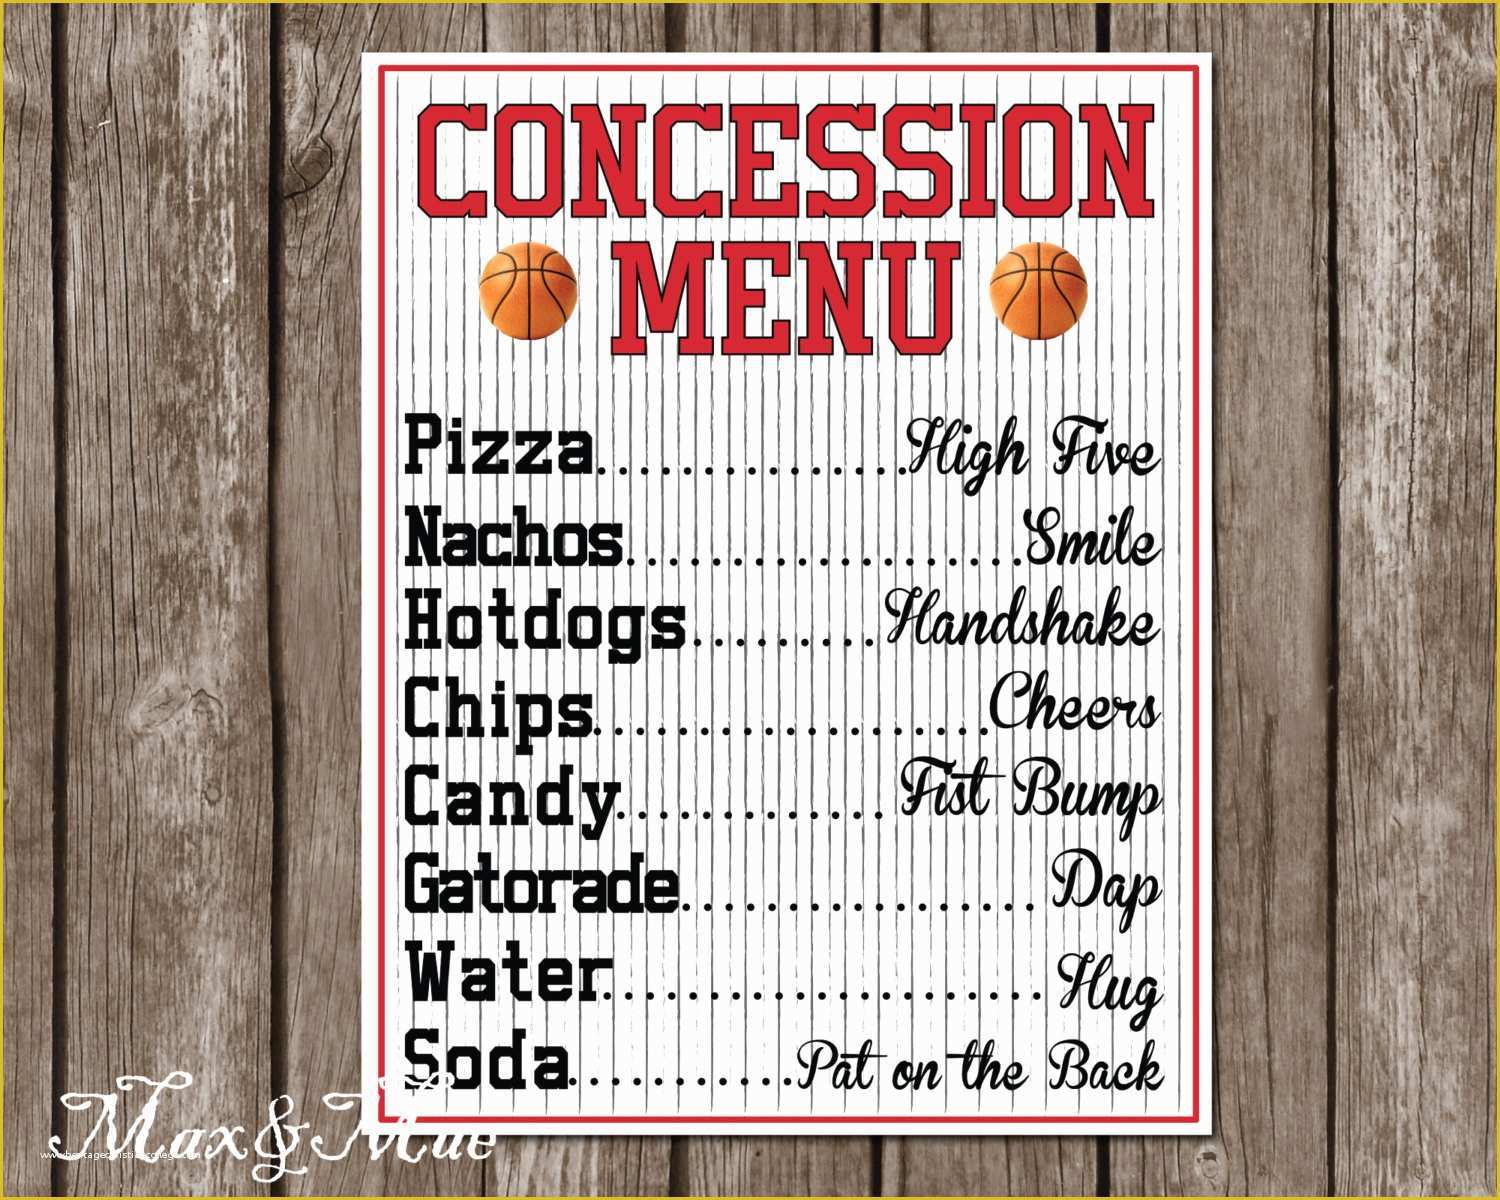 50 Concession Stand Menu Template Free Heritagechristiancollege